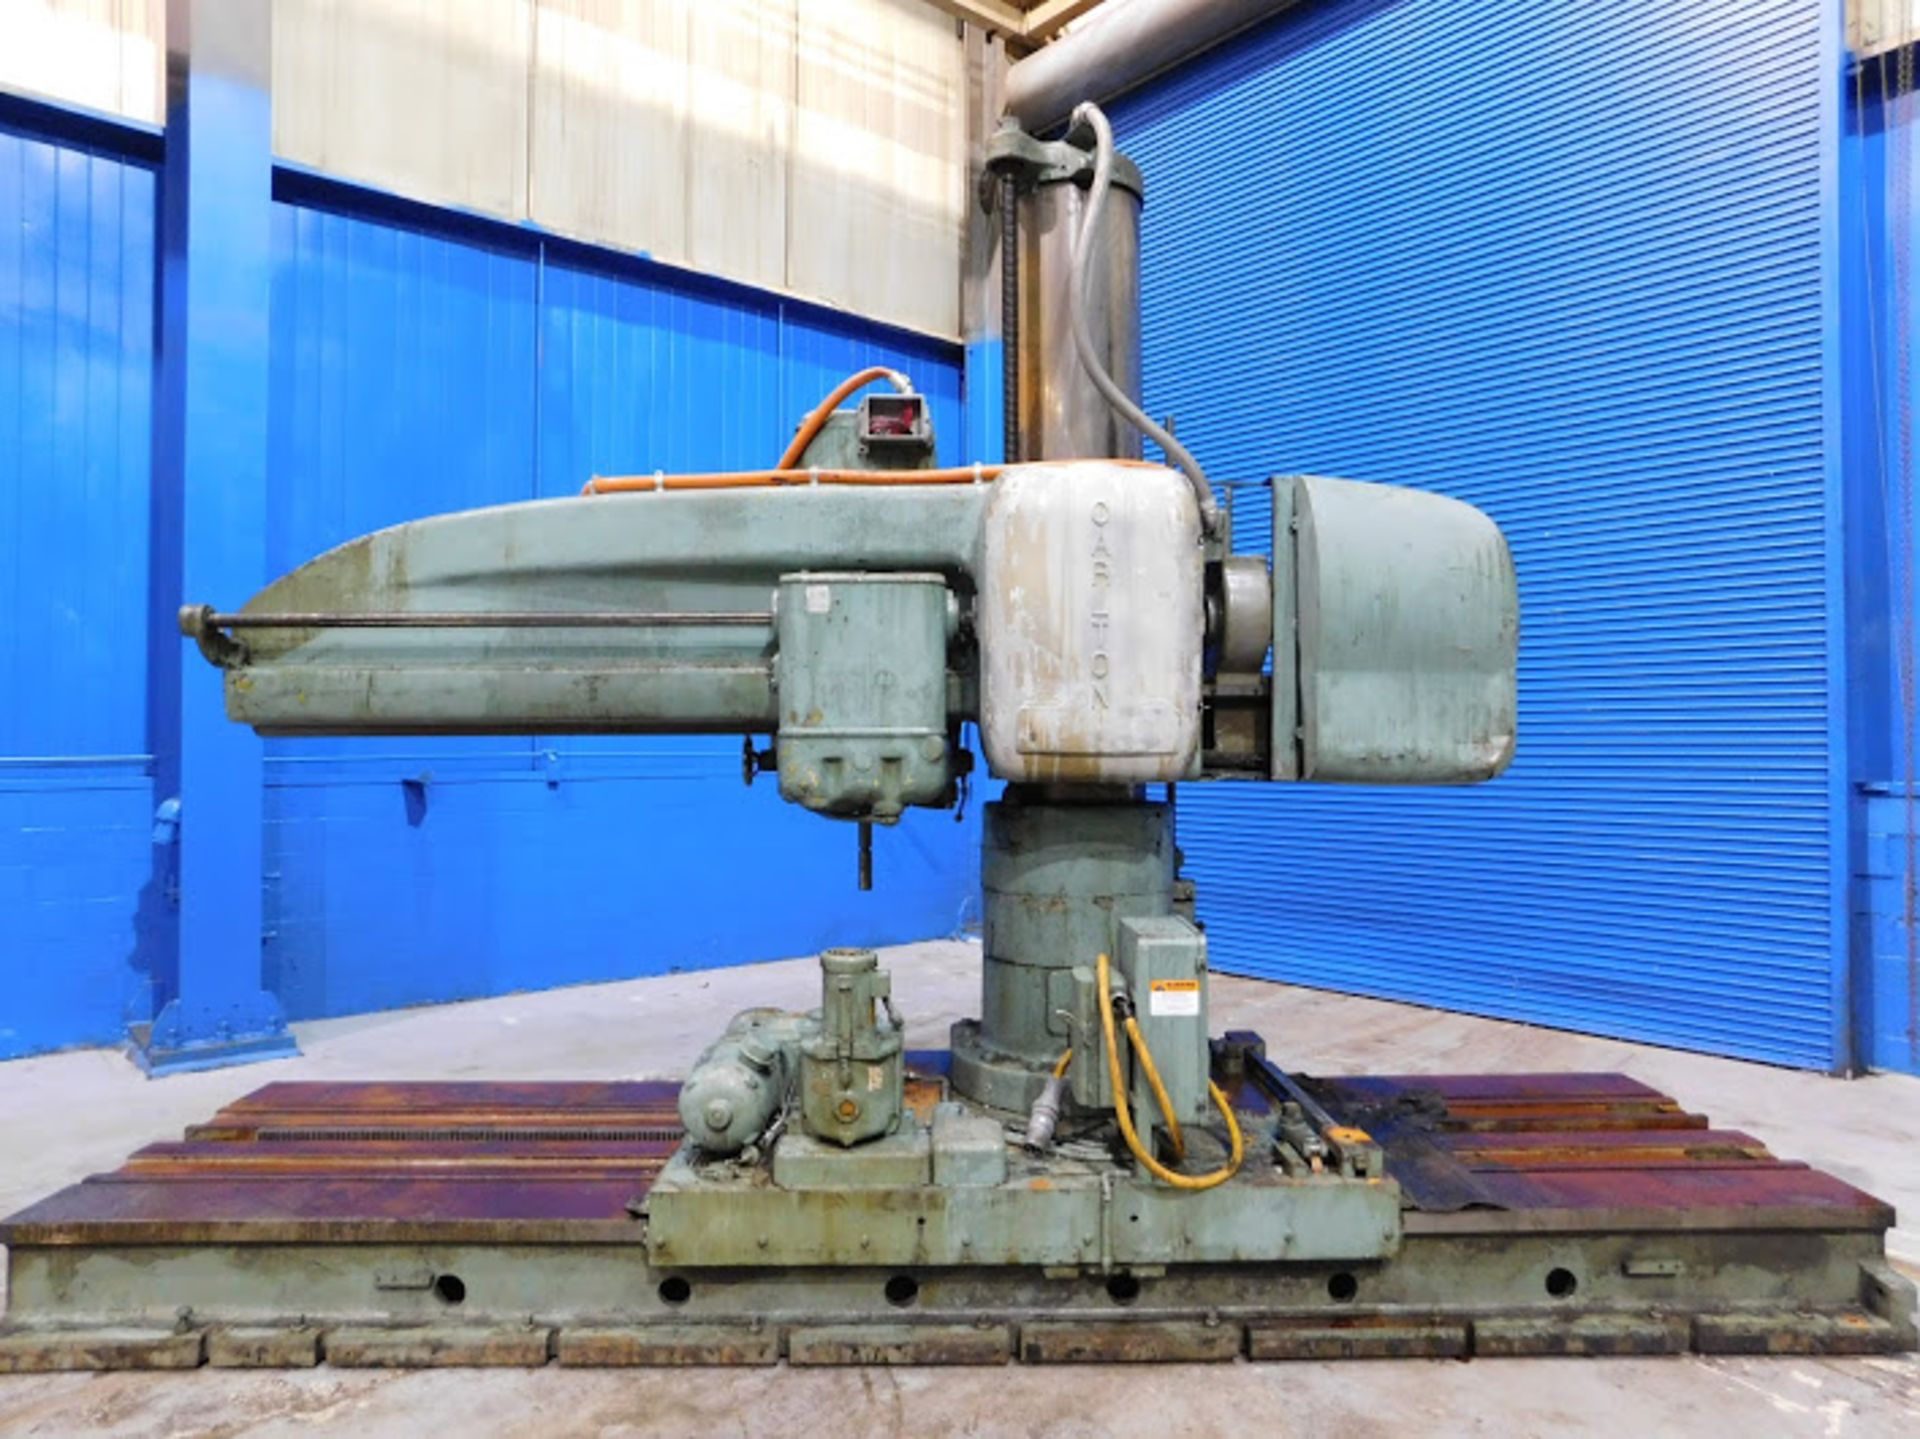 Carlton Traveling Base Radial Arm Drill, 7' x 19", Mdl: 4A (7097P) (Located In Painesville, OH) - Image 6 of 10